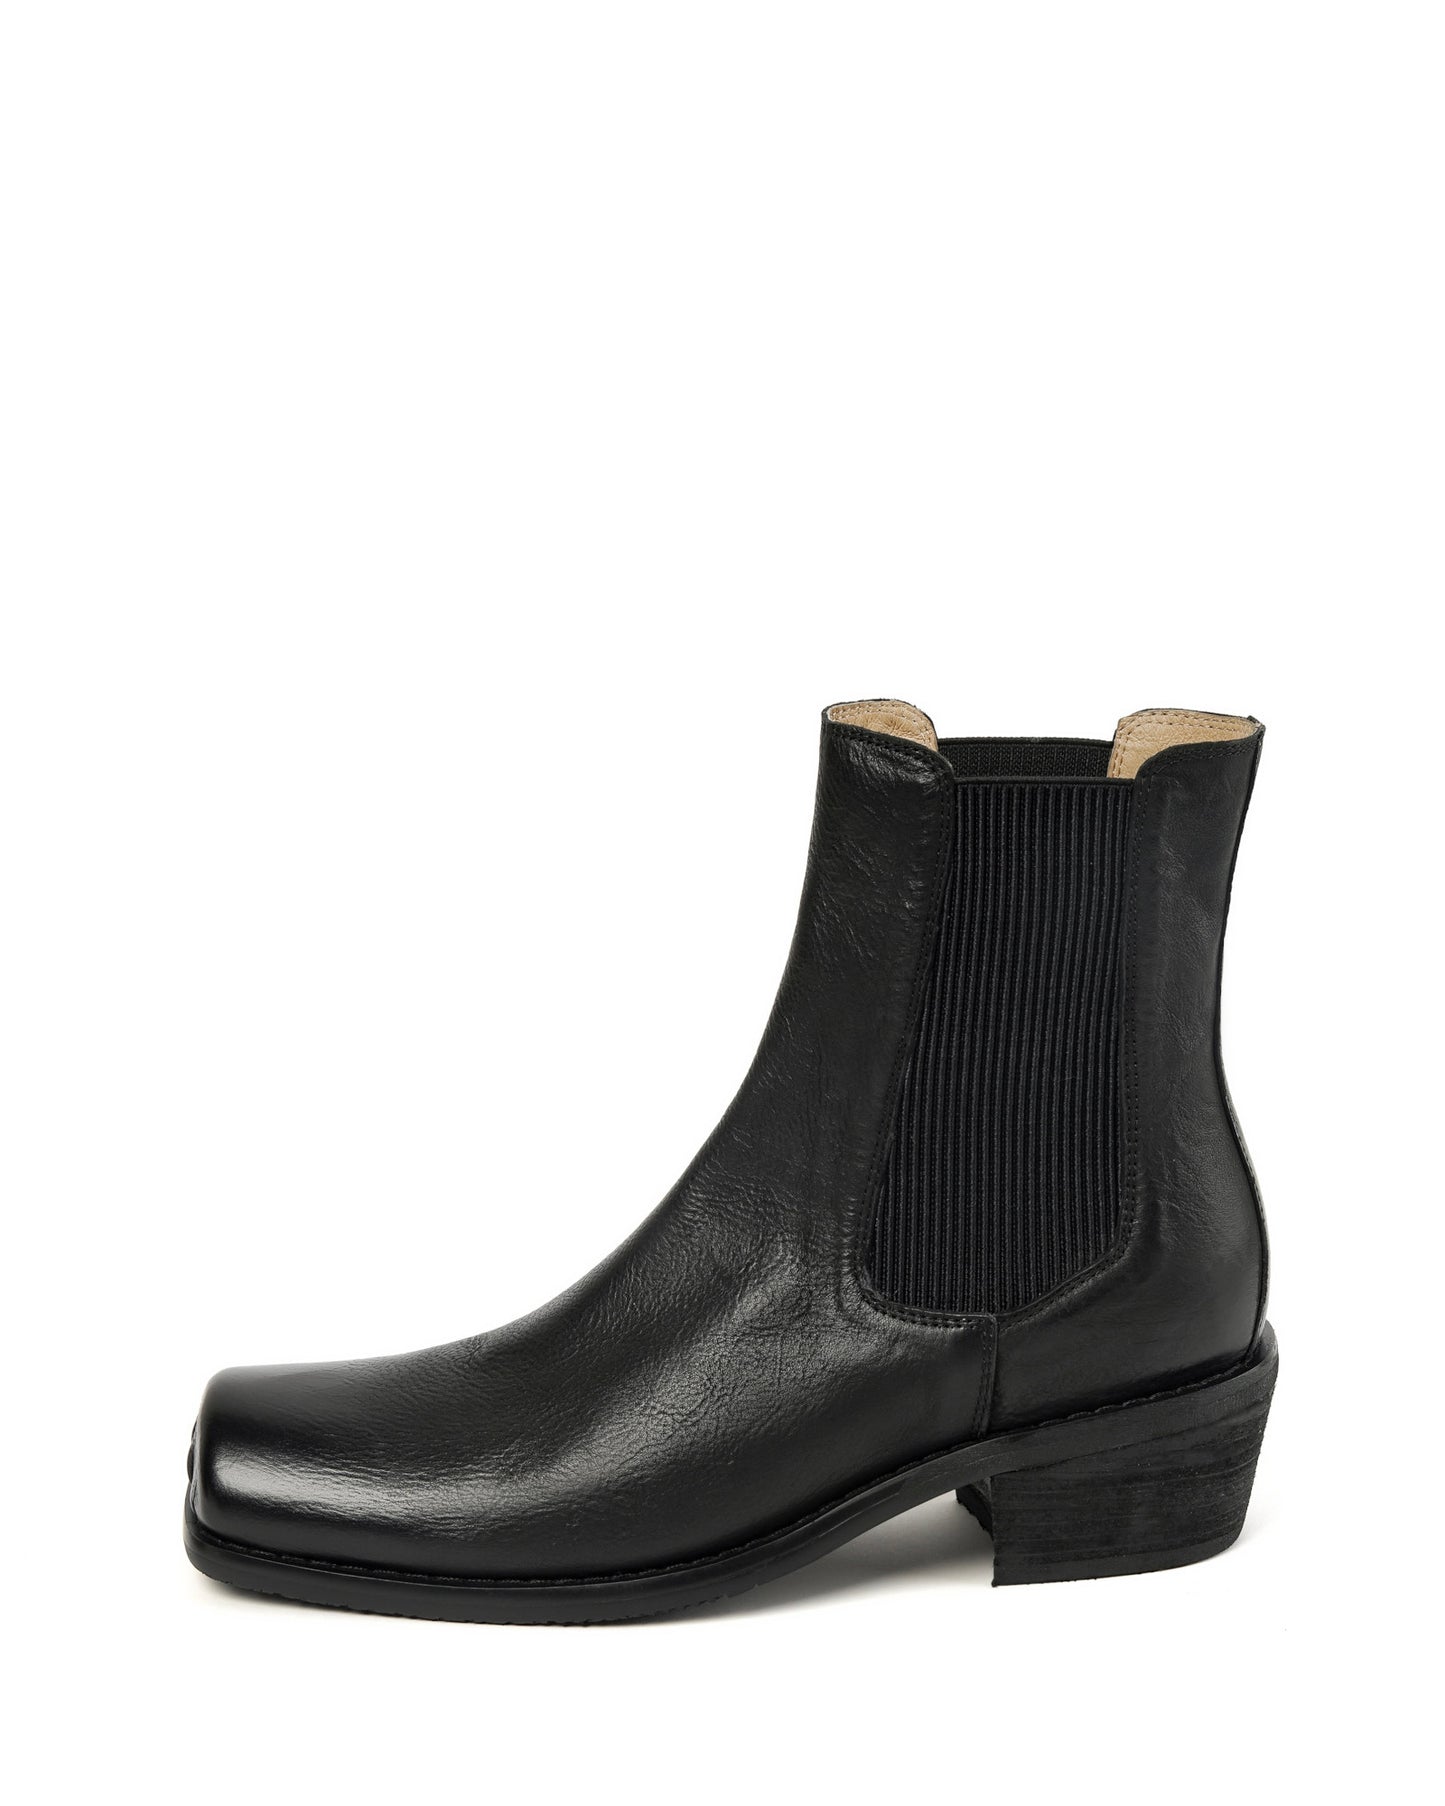 Saly-black-leather-chelsea-boots-1